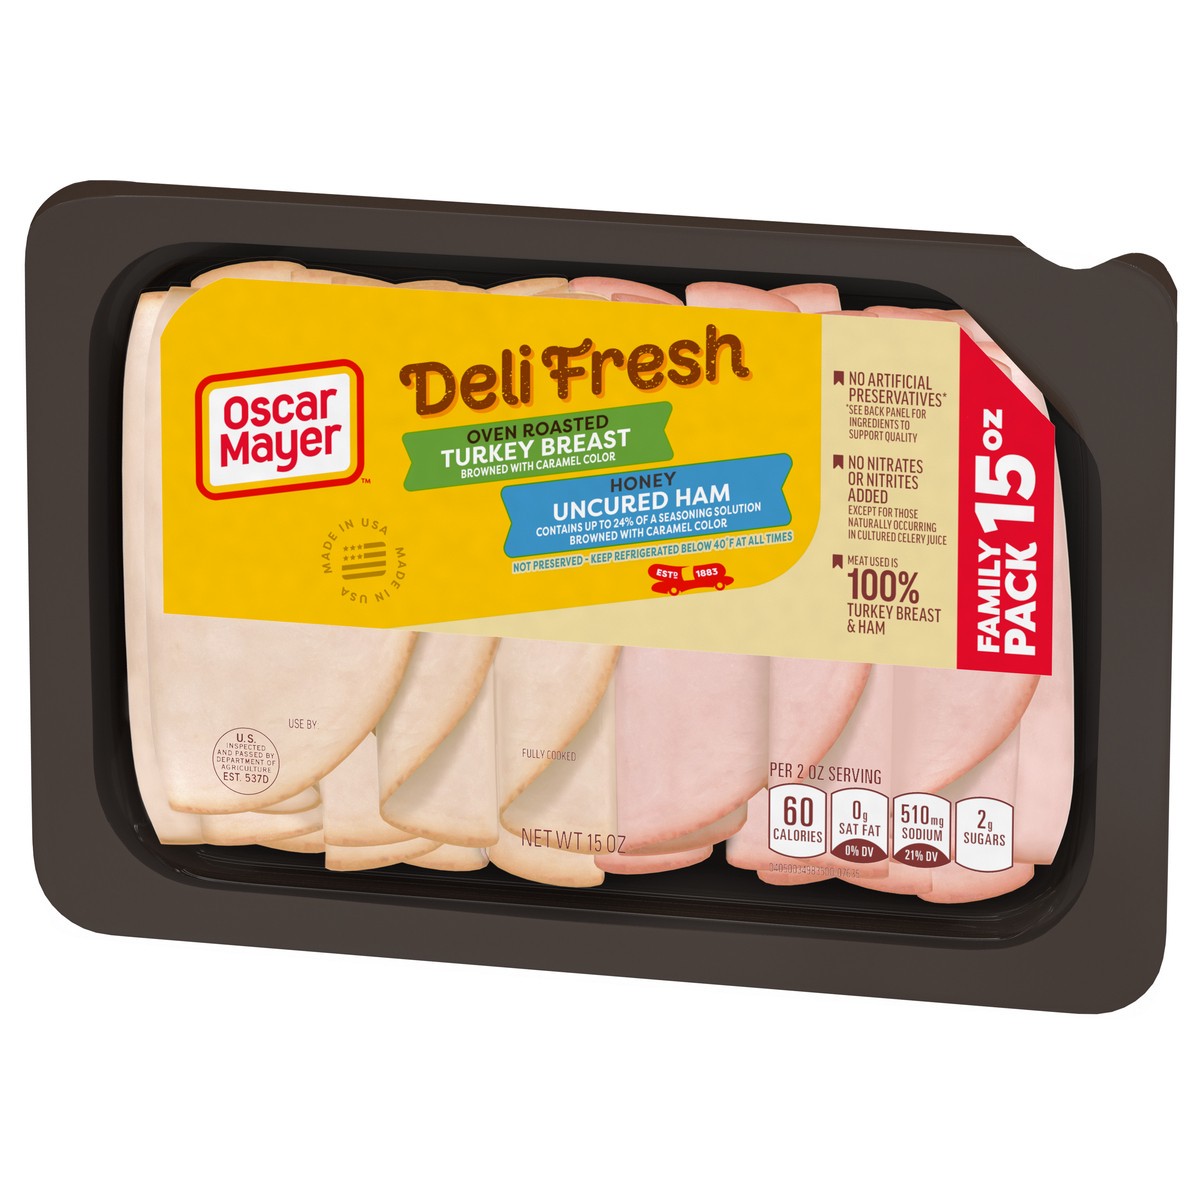 slide 7 of 9, Oscar Mayer Deli Fresh Oven Roasted Turkey Breast & Honey Uncured Ham Sliced Lunch Meat Variety Pack, 15 oz. Family Size Tray, 15 oz